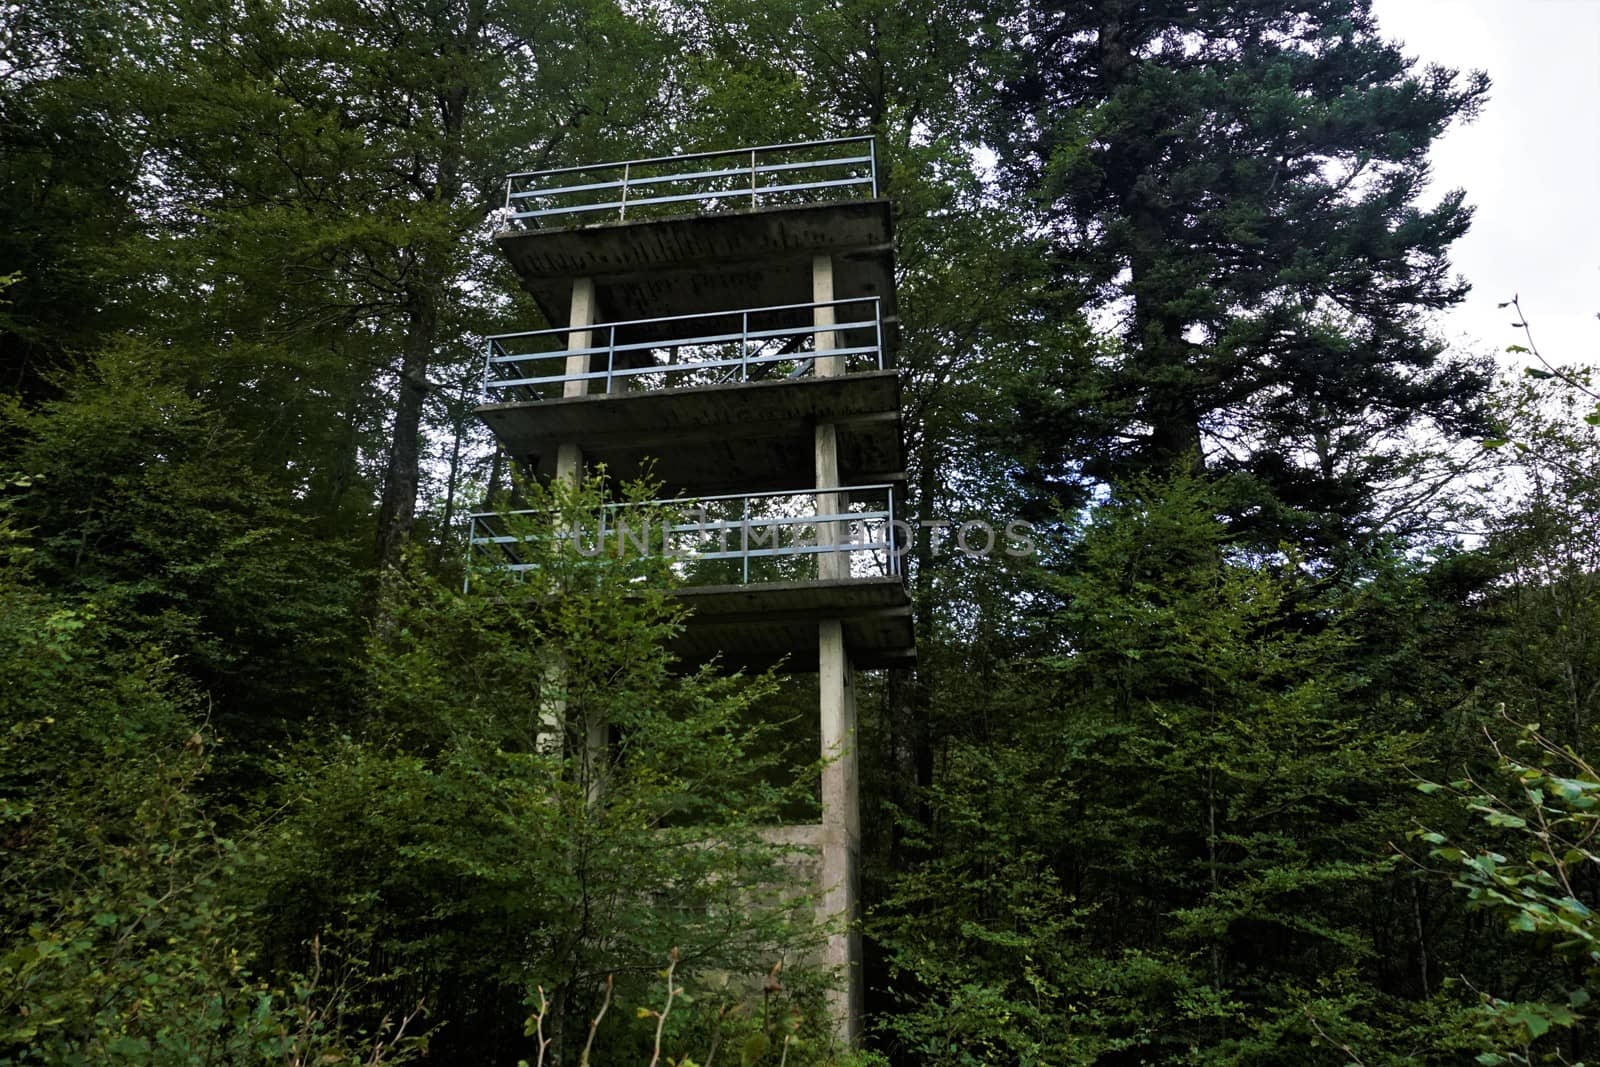 Ruin of a tower made of concrete with guardrail spotted in the forest in the Vosges, France